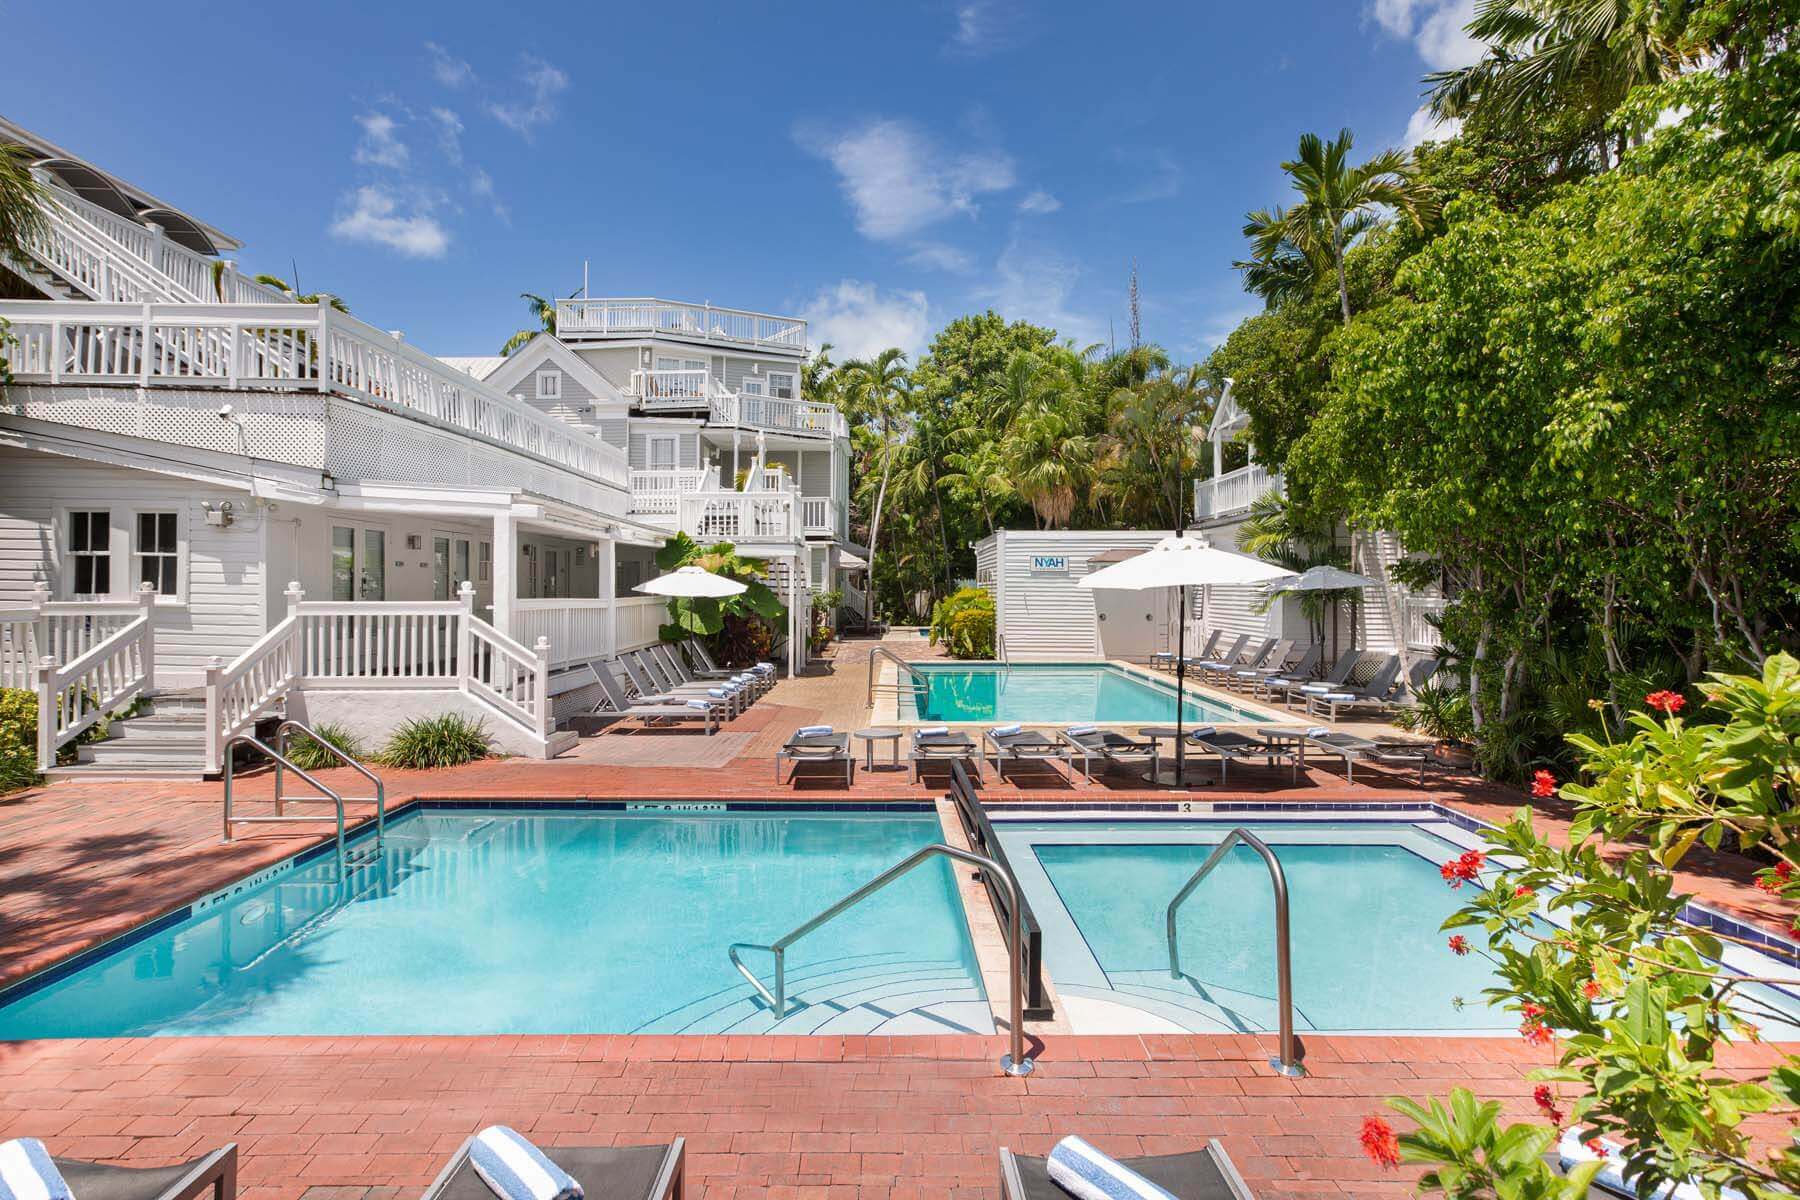 The pools at a Key West hotel to enjoy pizza by.